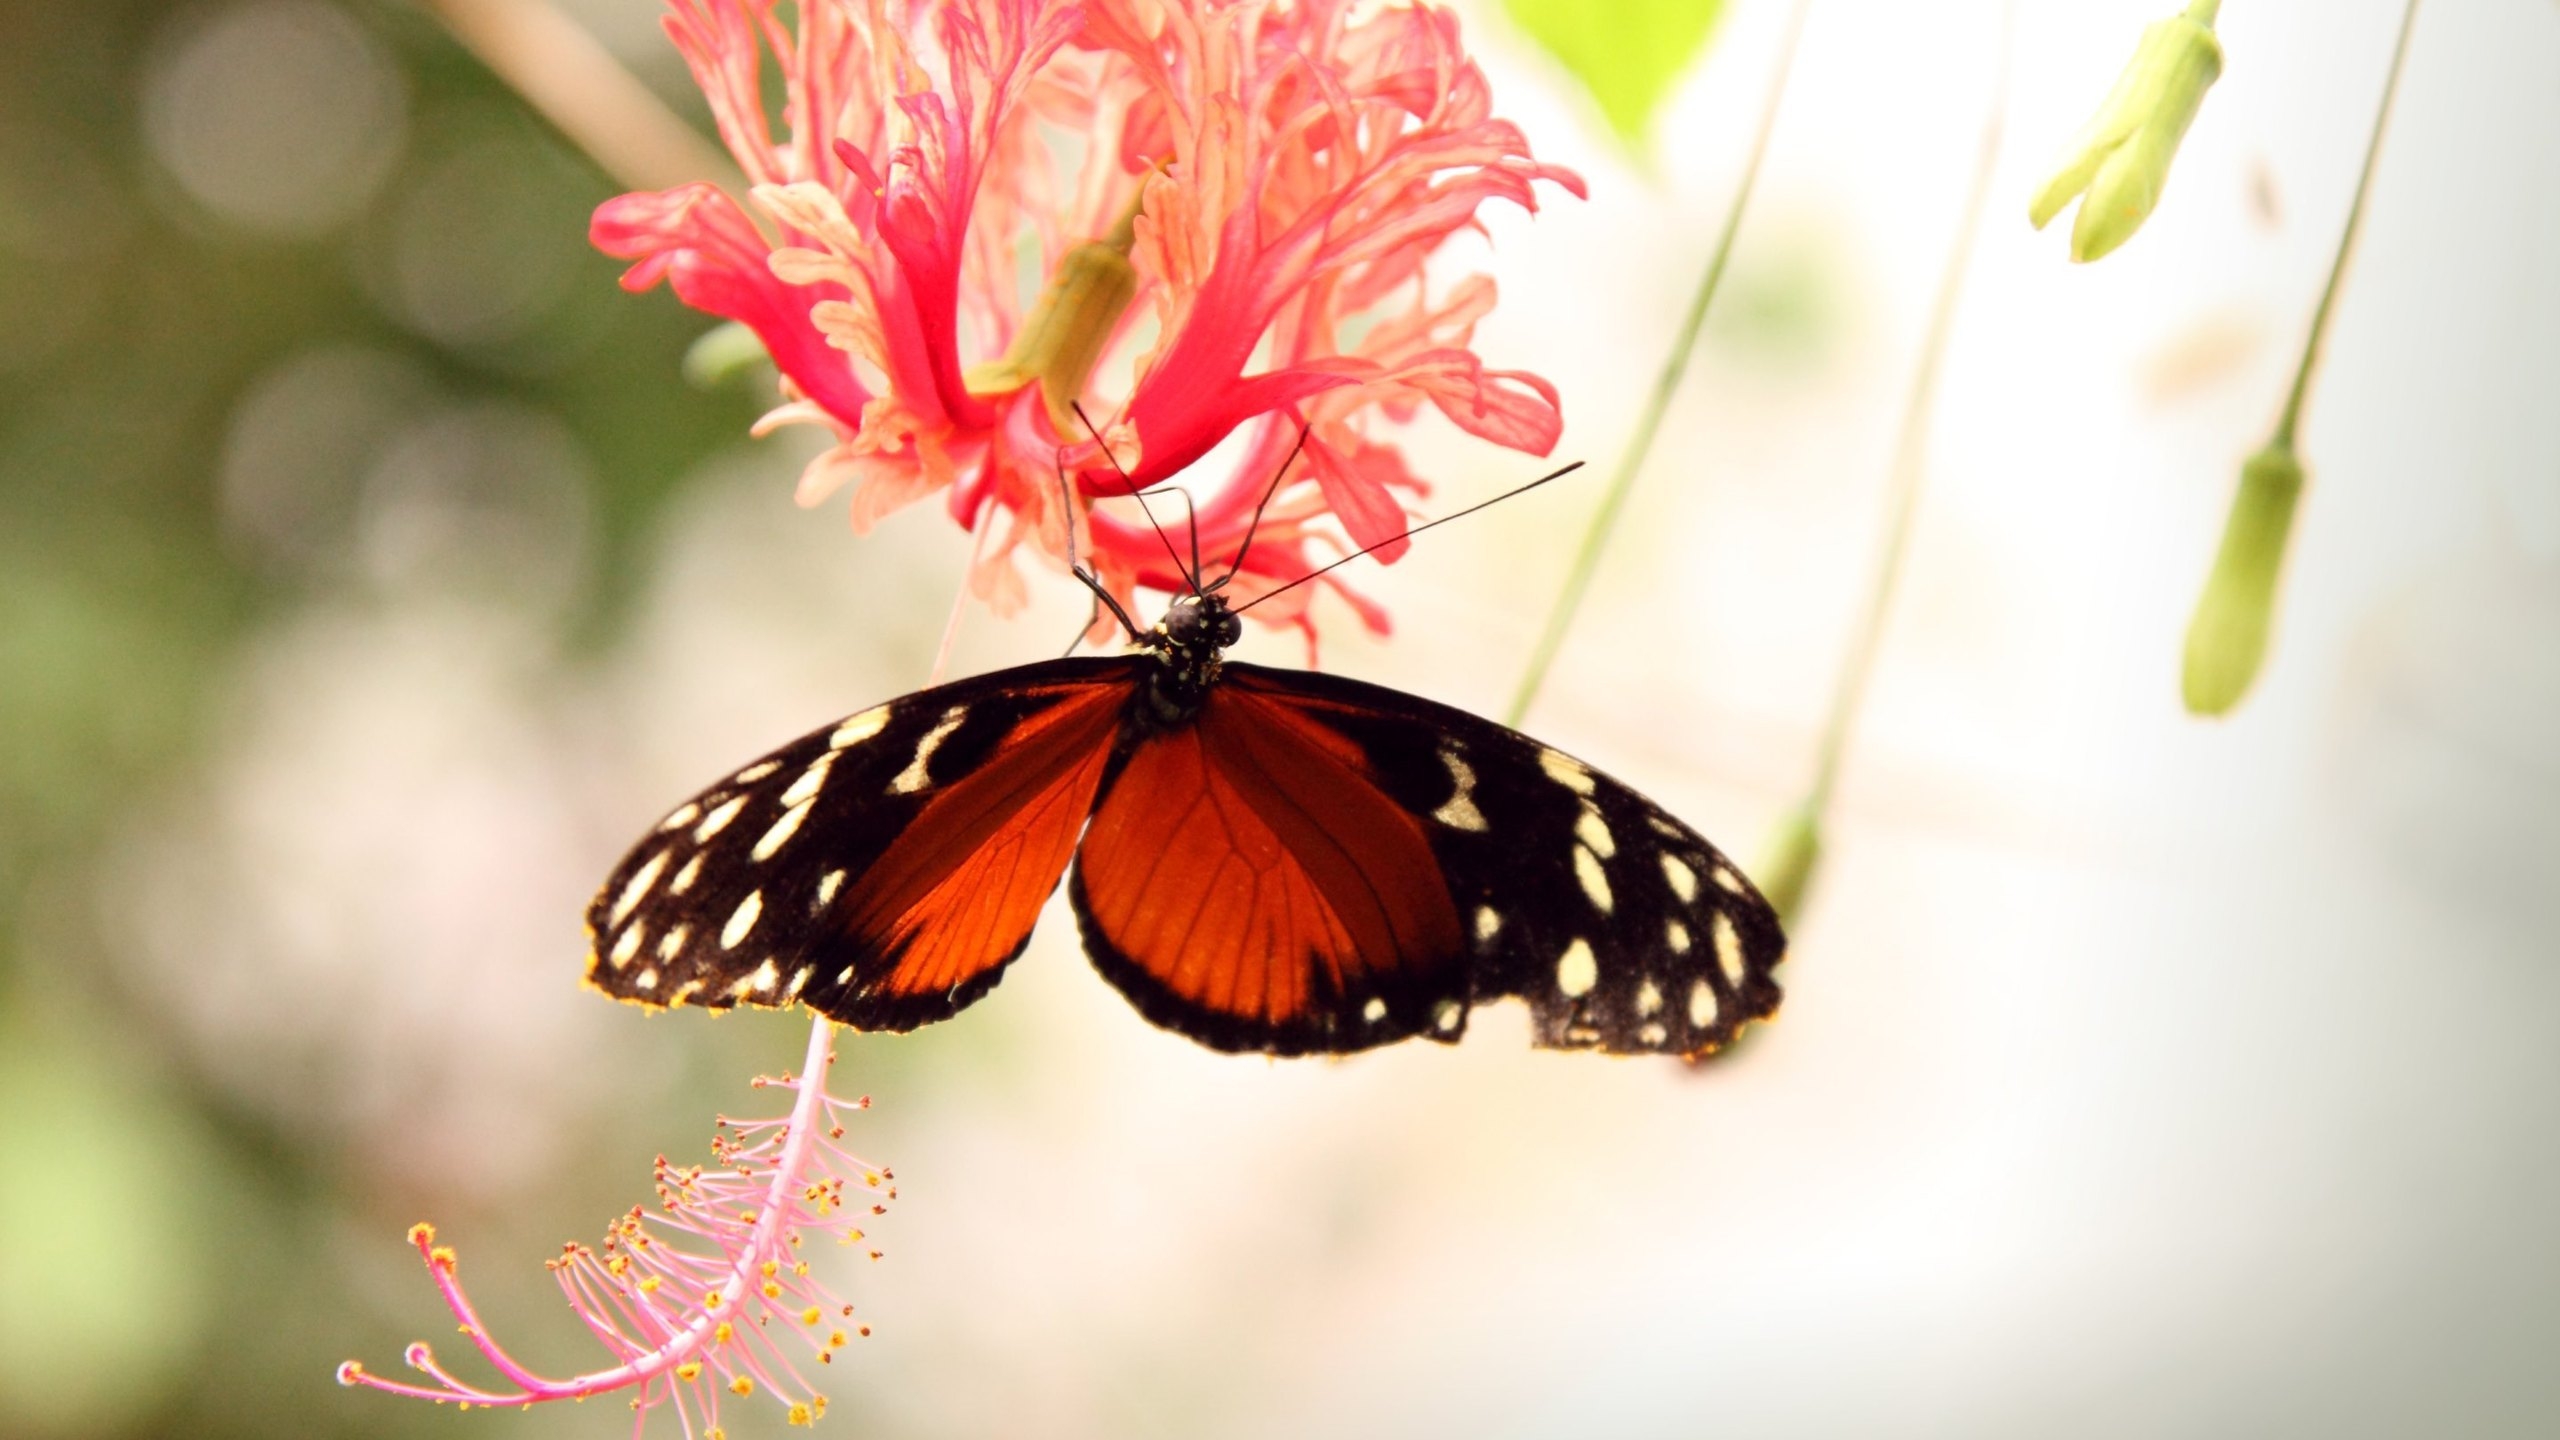 Butterfly on a Flower for 2560x1440 HDTV resolution